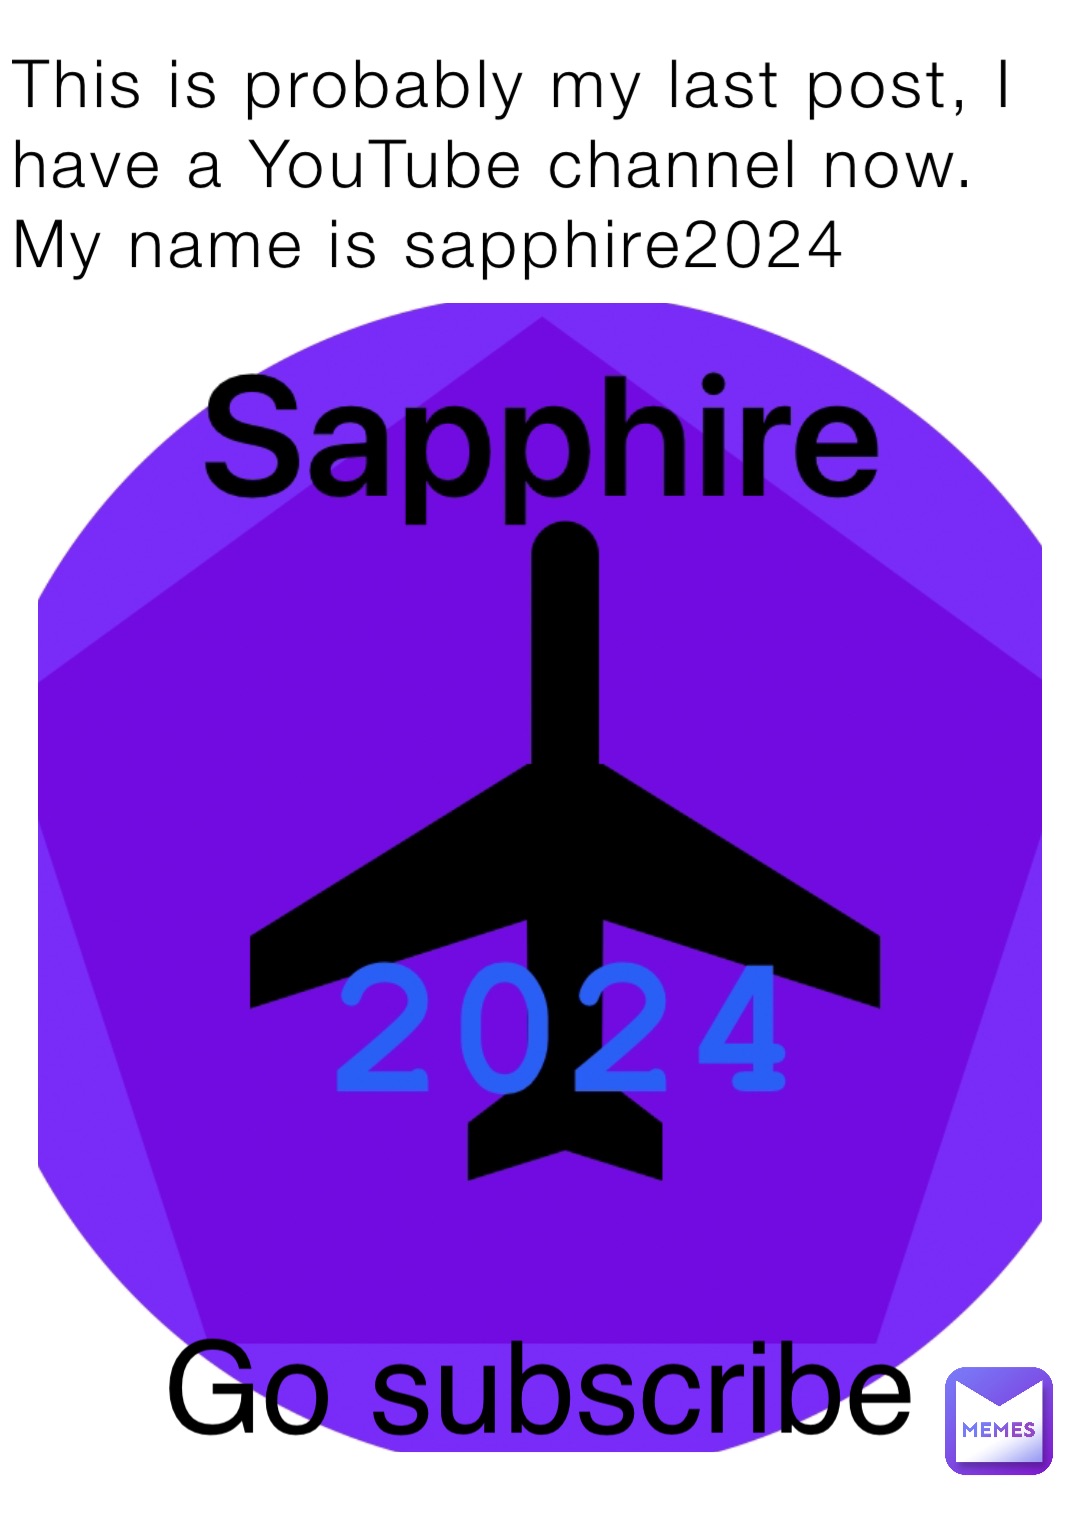 This is probably my last post, I have a YouTube channel now. My name is sapphire2024 Go subscribe